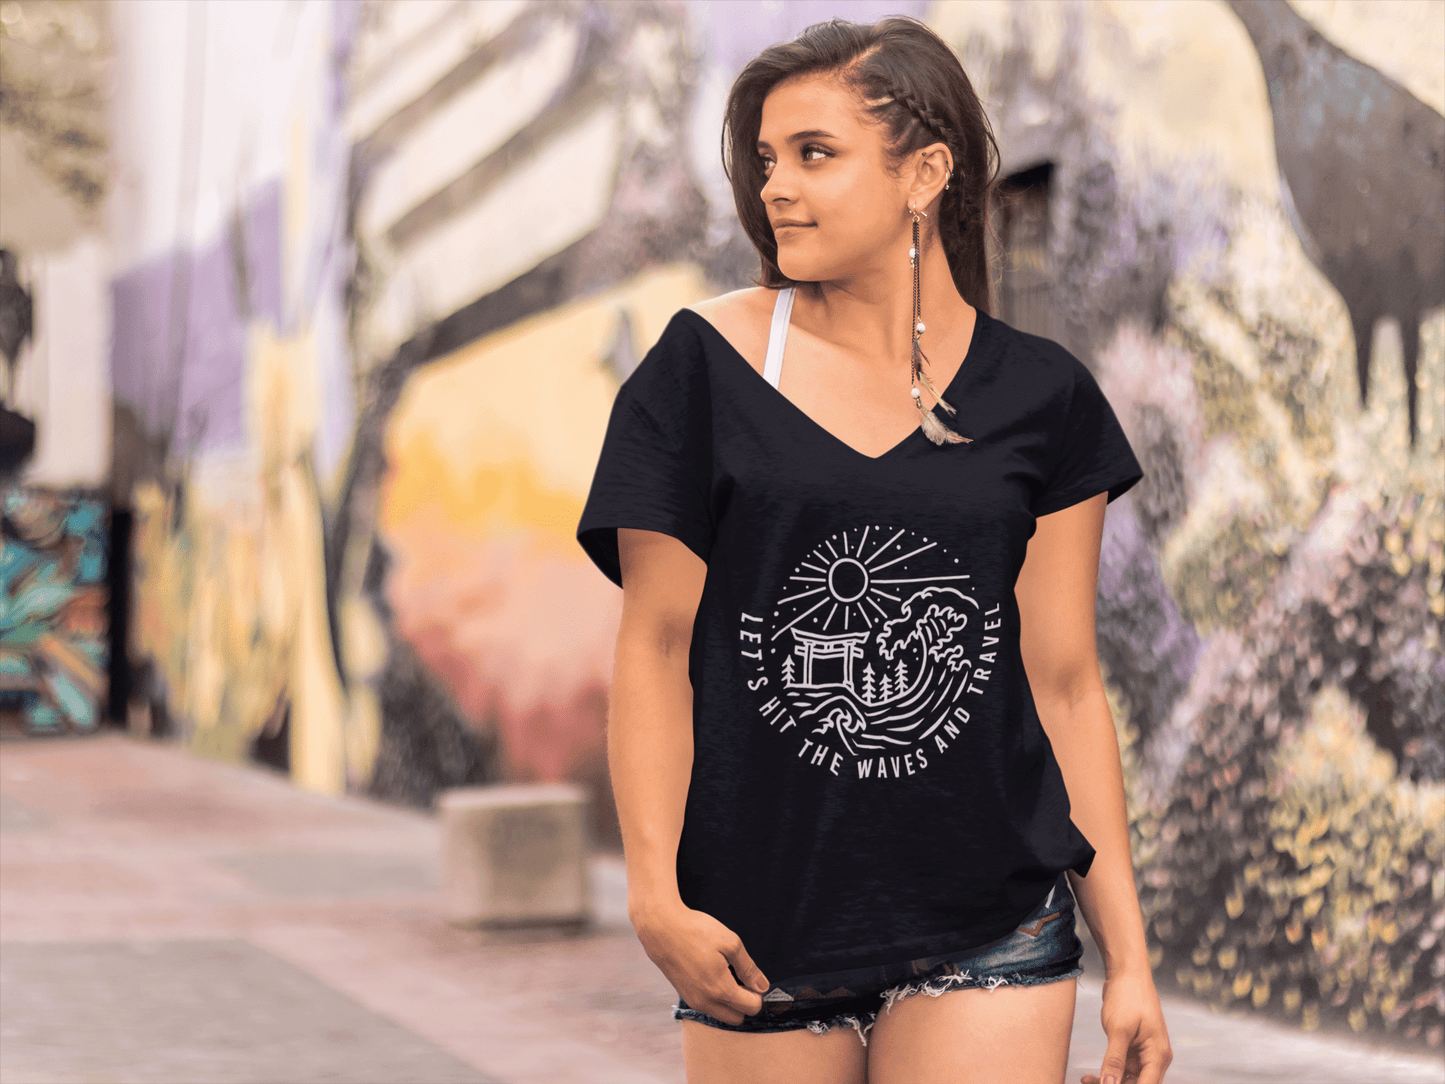 ULTRABASIC Women's Adventure T-Shirt - Let's hit the Waves and Travel - Surfing T Shirt Black